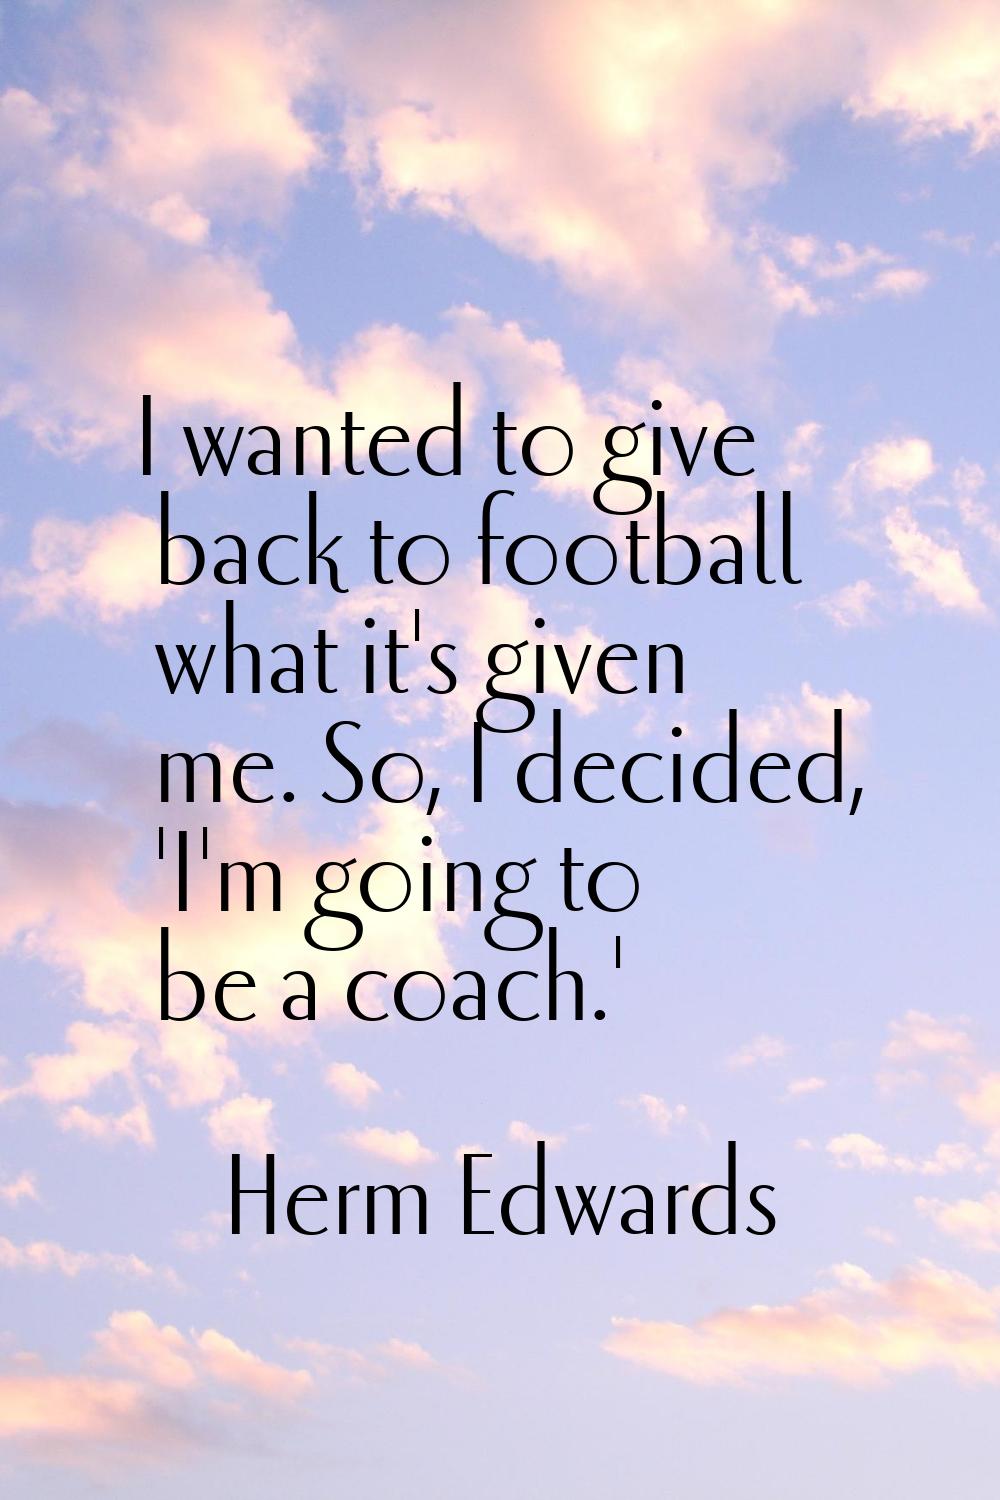 I wanted to give back to football what it's given me. So, I decided, 'I'm going to be a coach.'